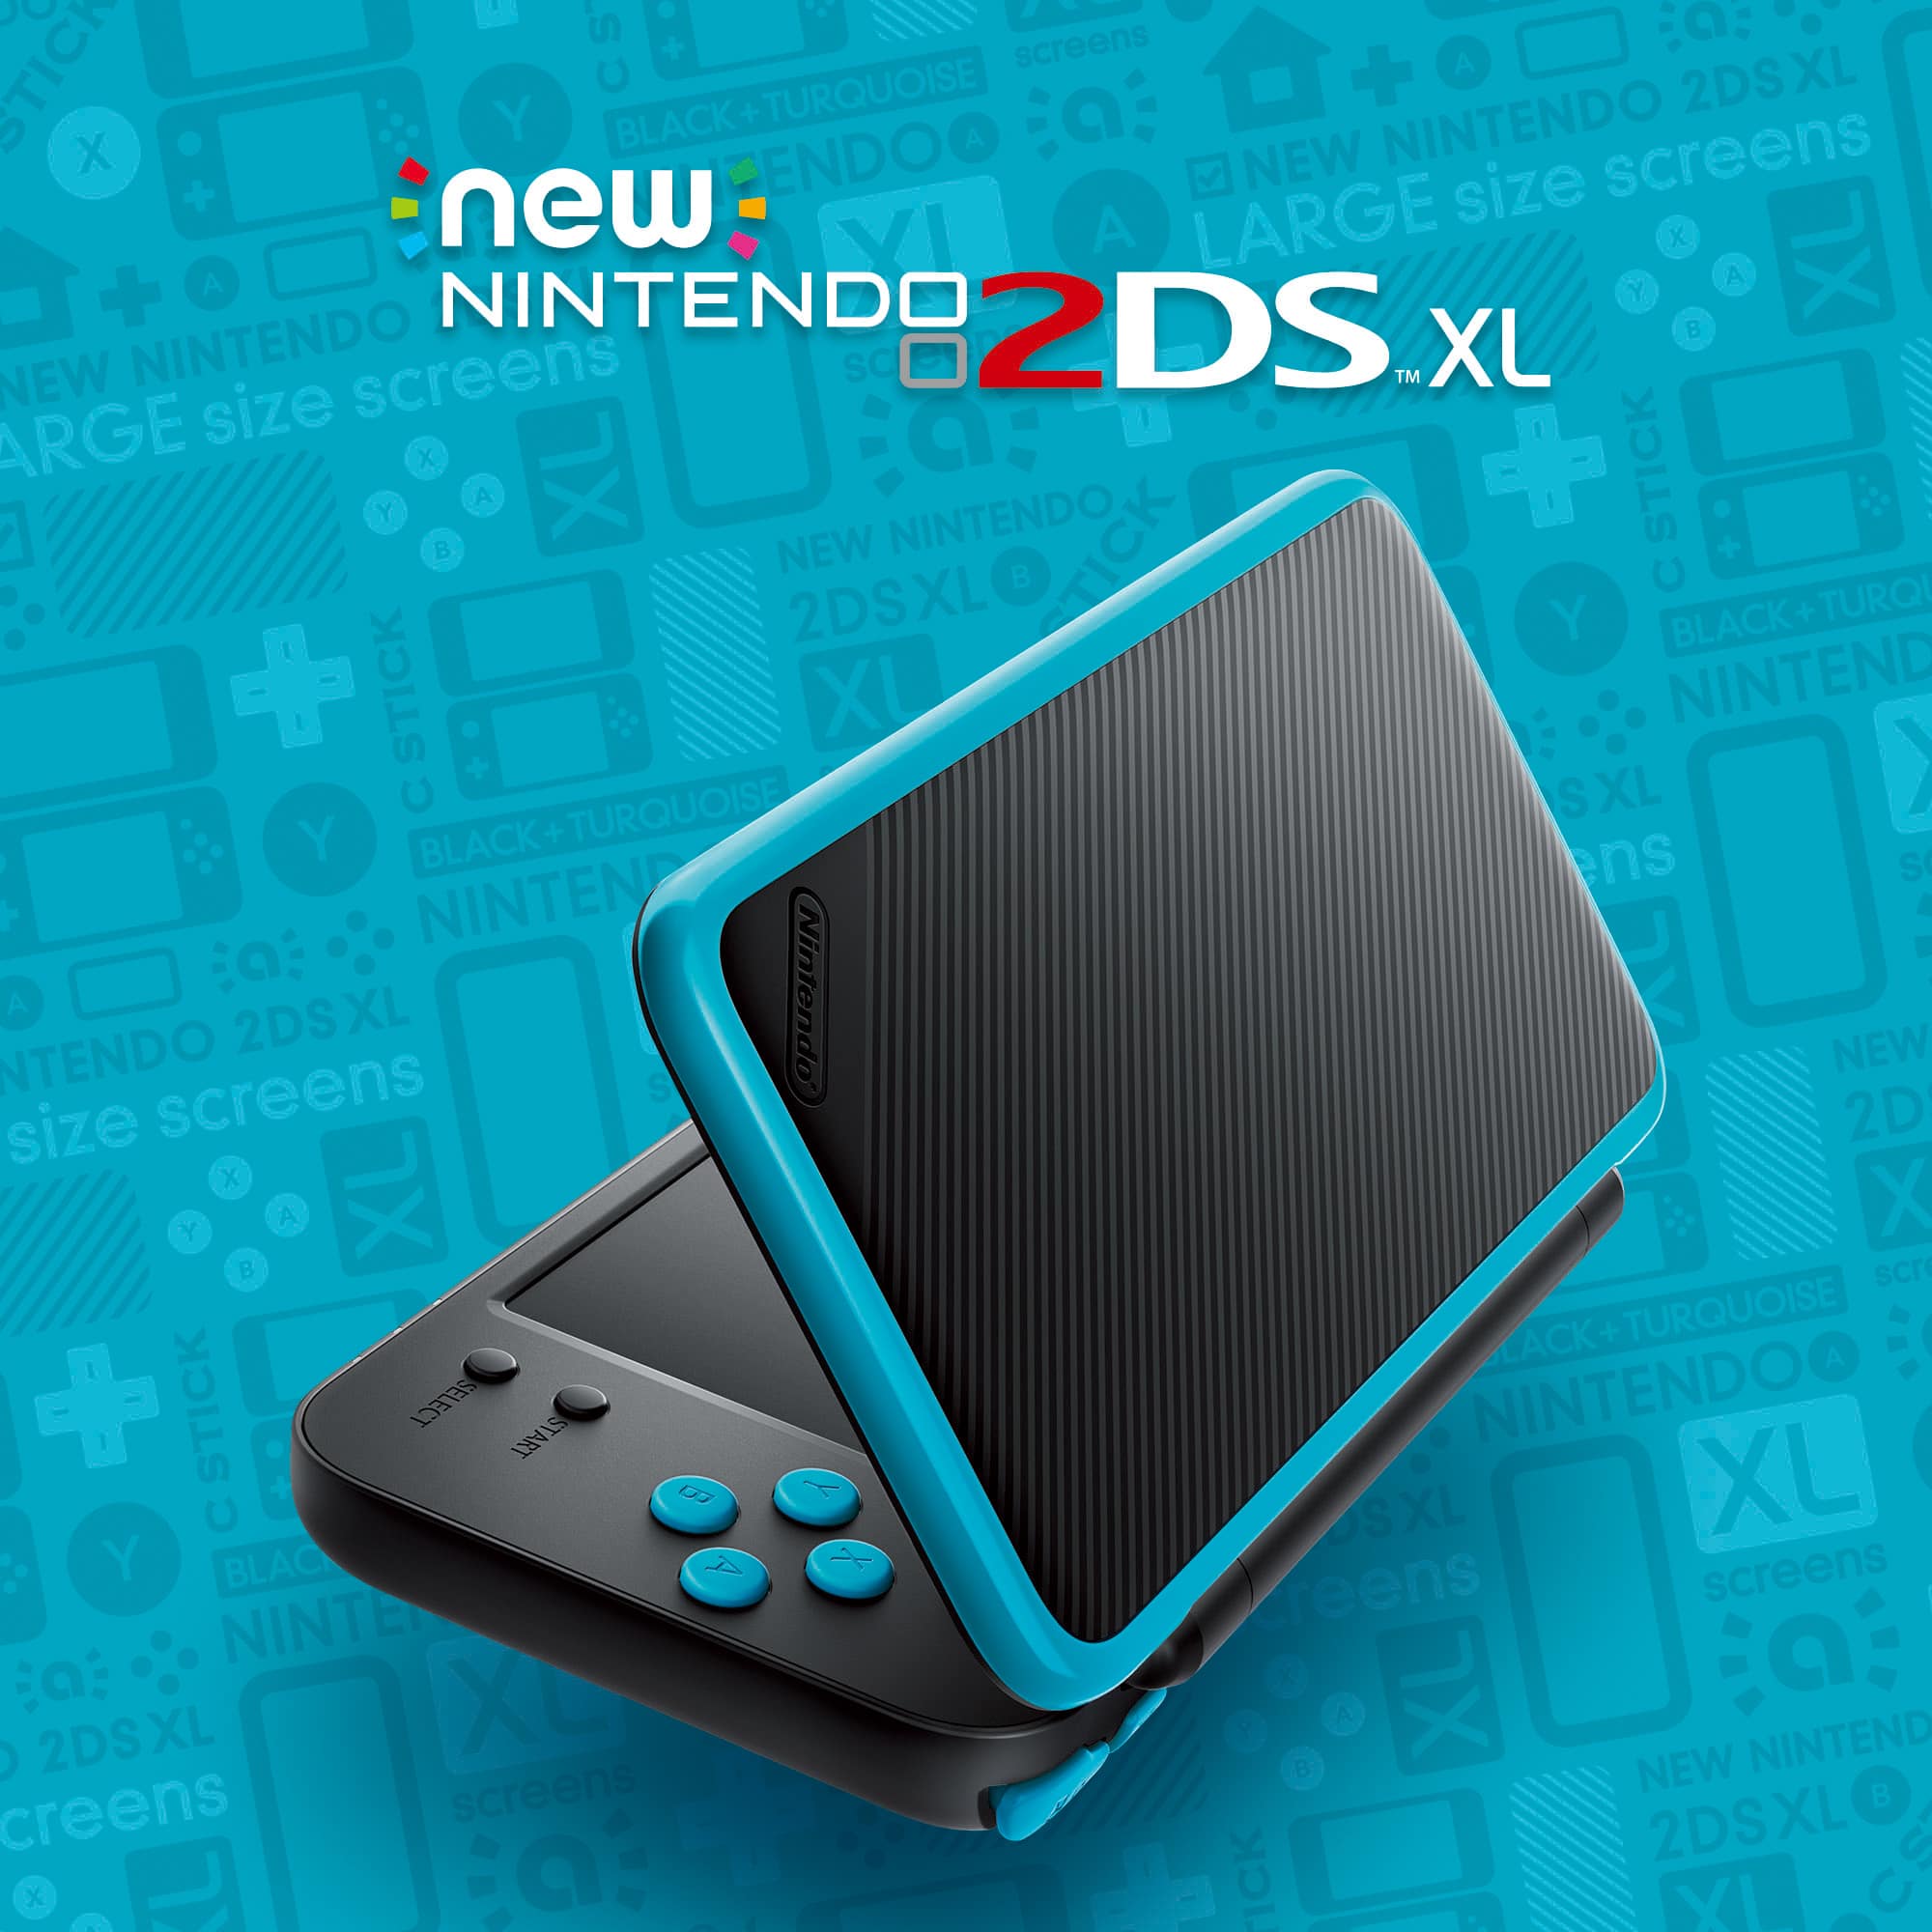 New Ds Xl Announced Launches In July